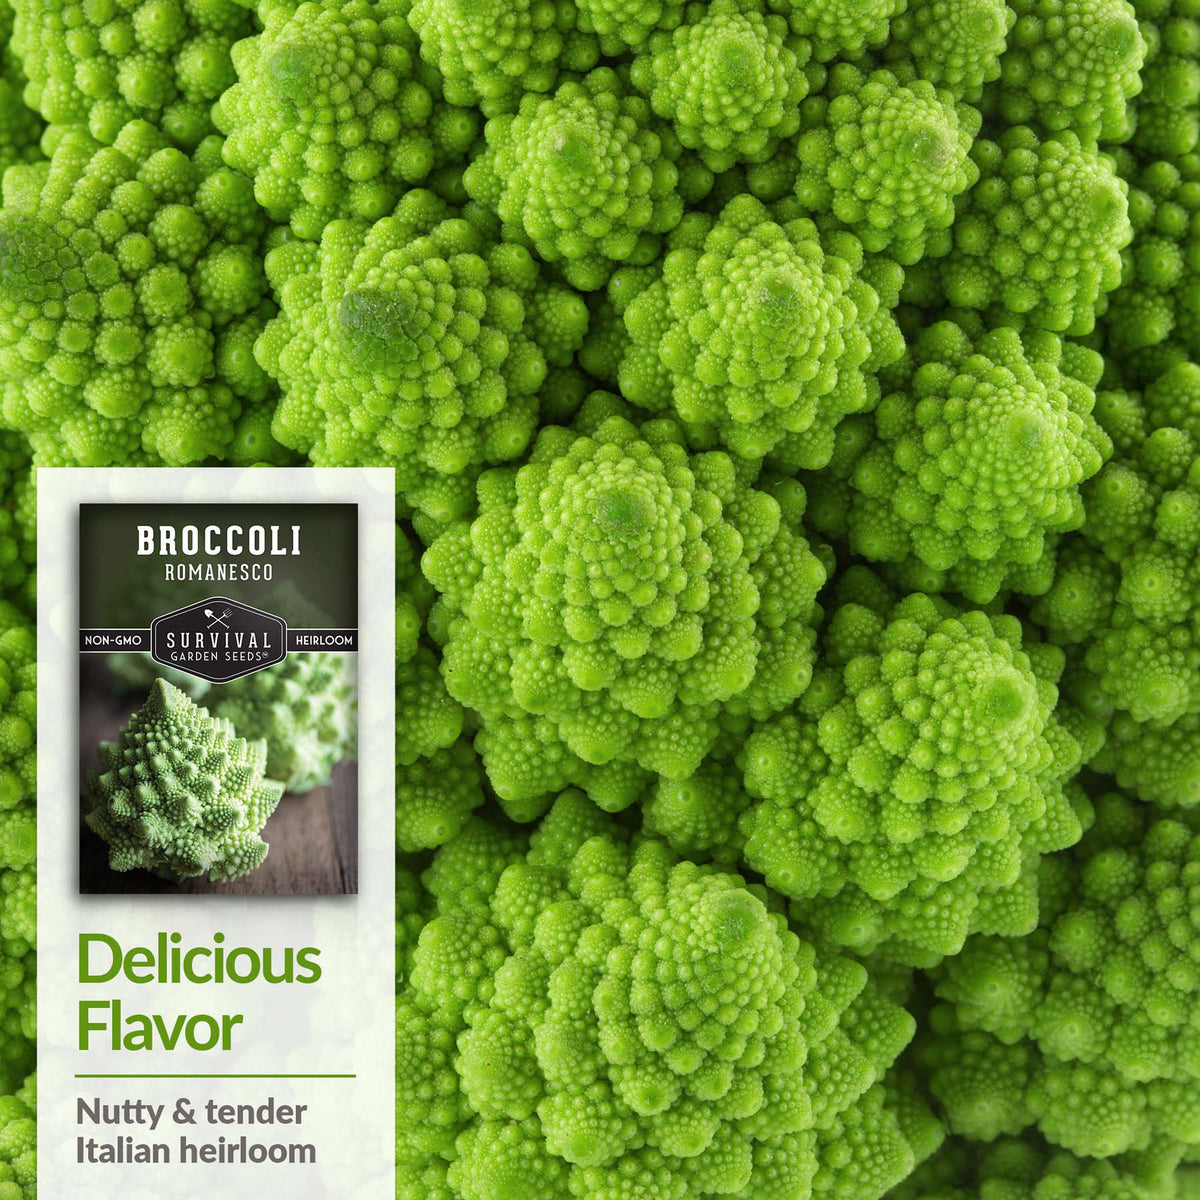 Romanesco Broccoli is a tender heirloom with a nutty flavor